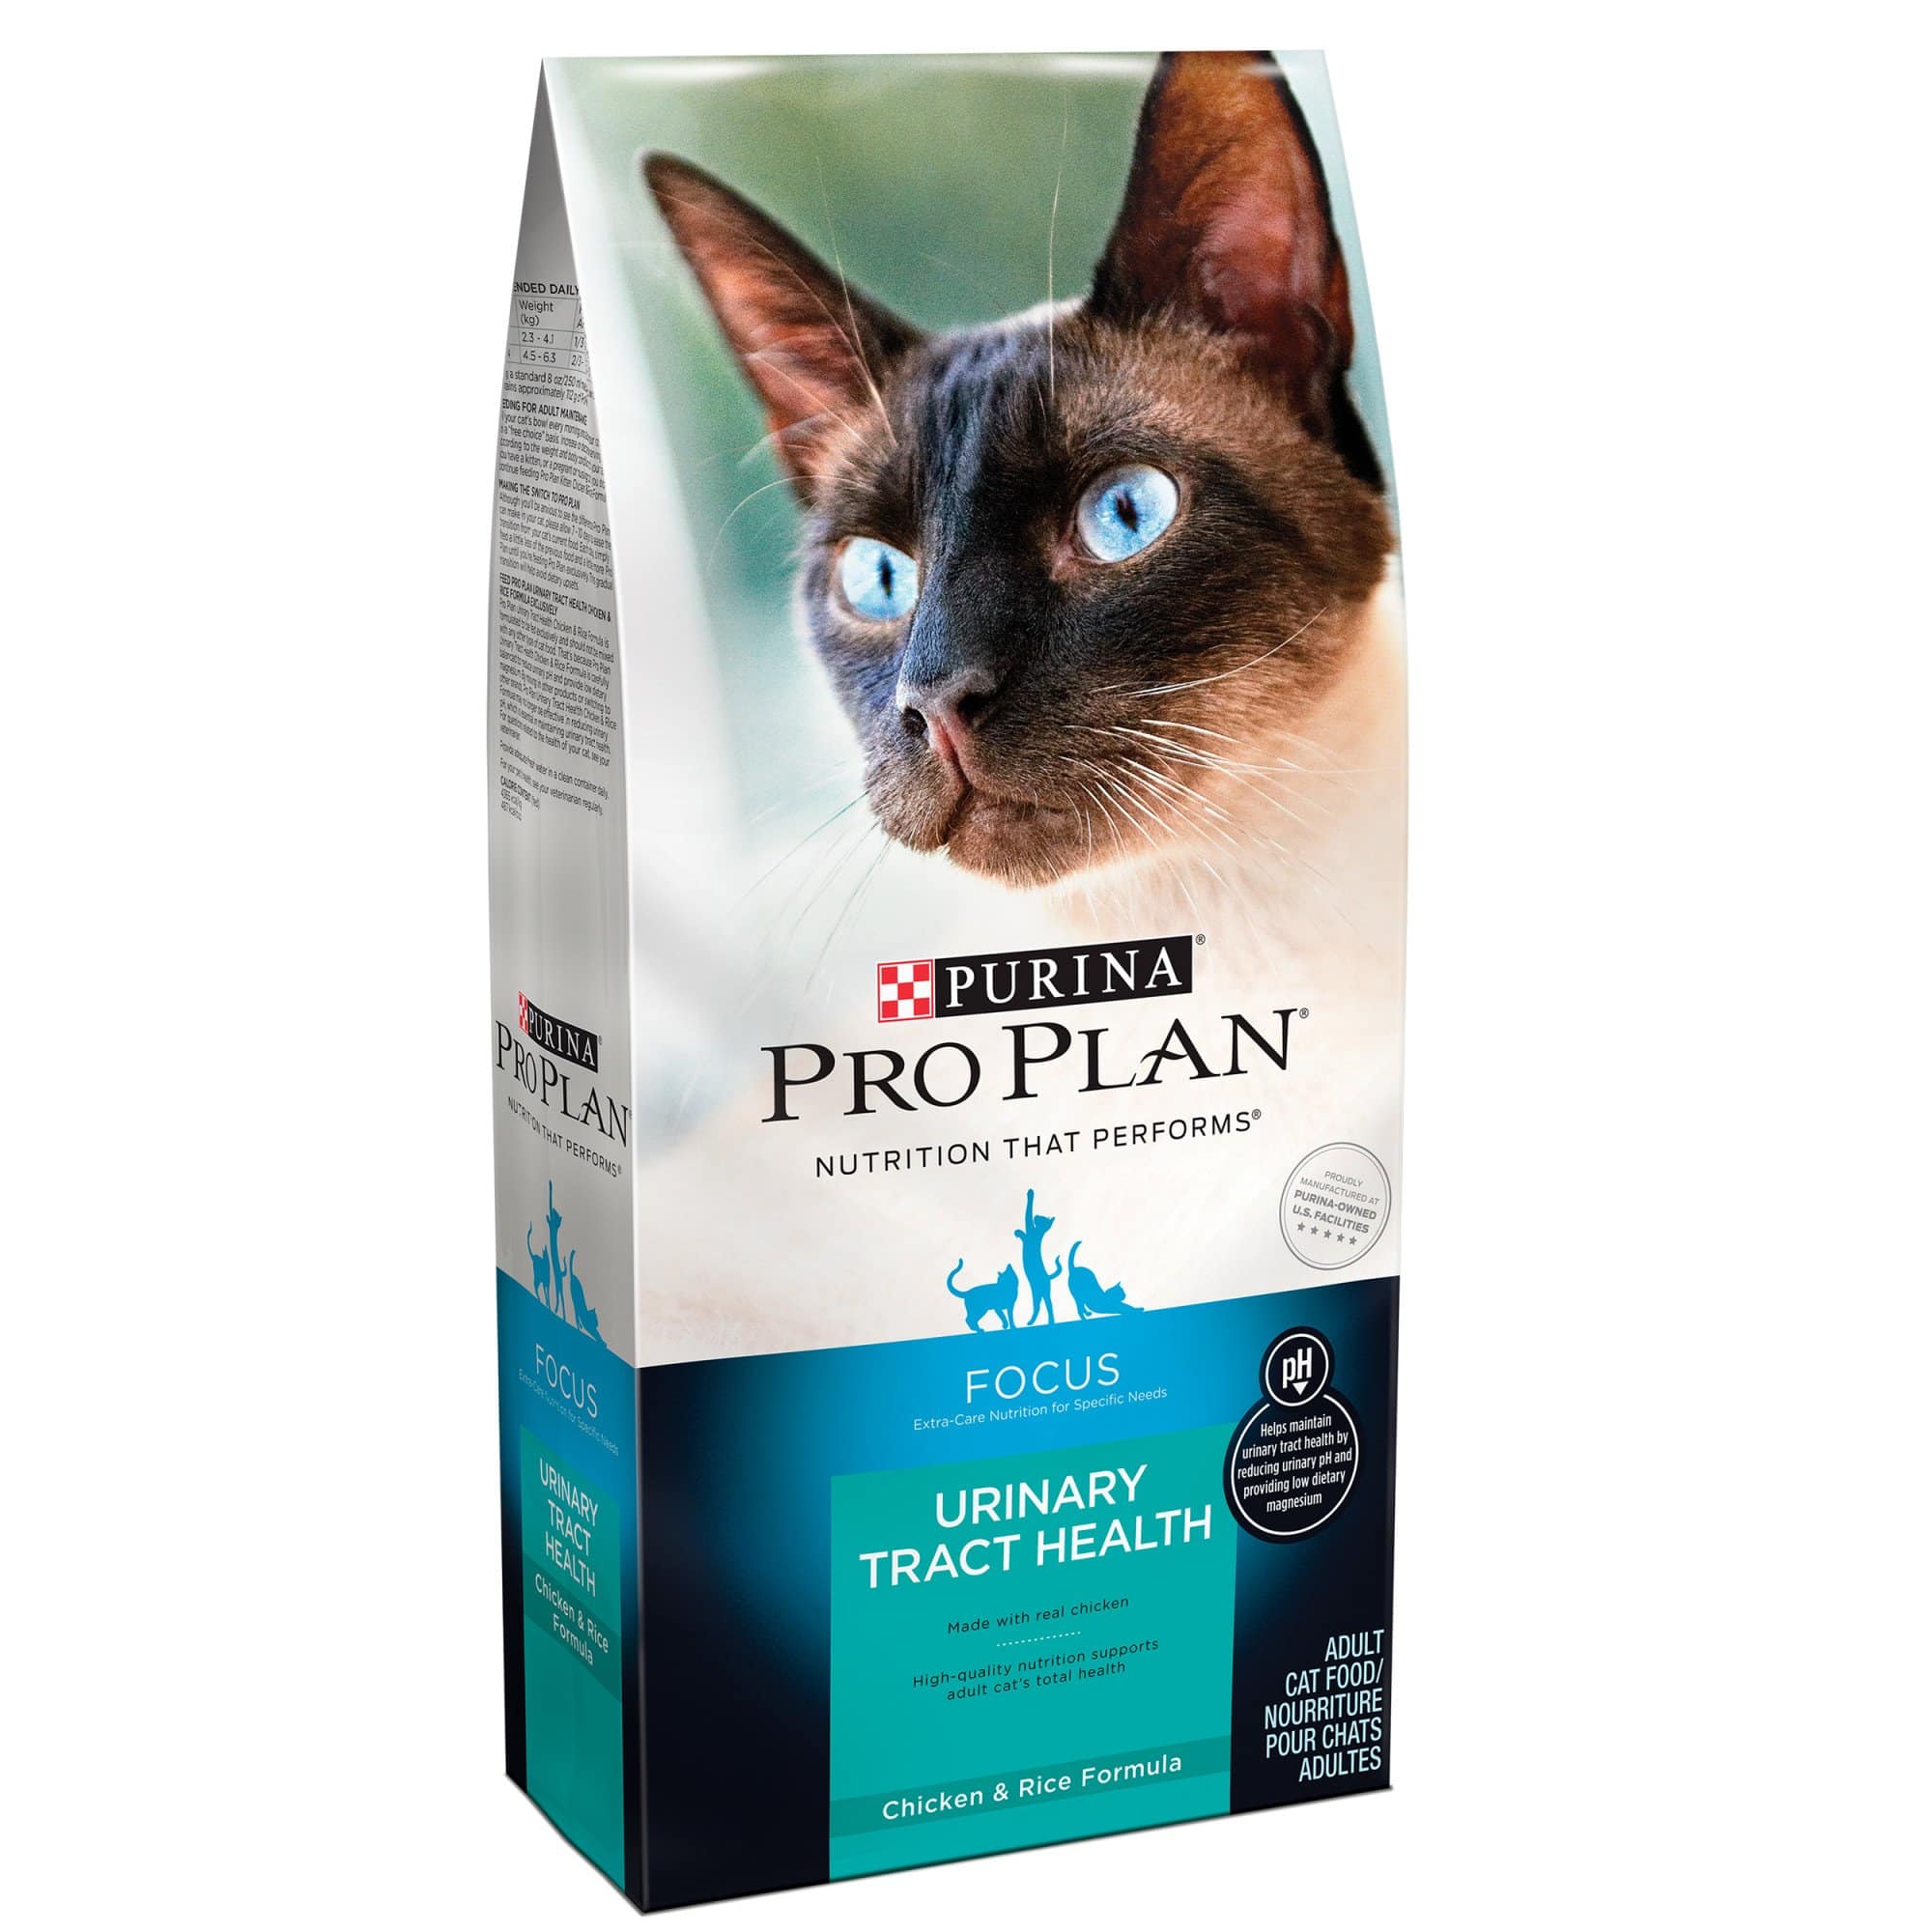 Pro Plan Focus Urinary Tract Health Cat Food